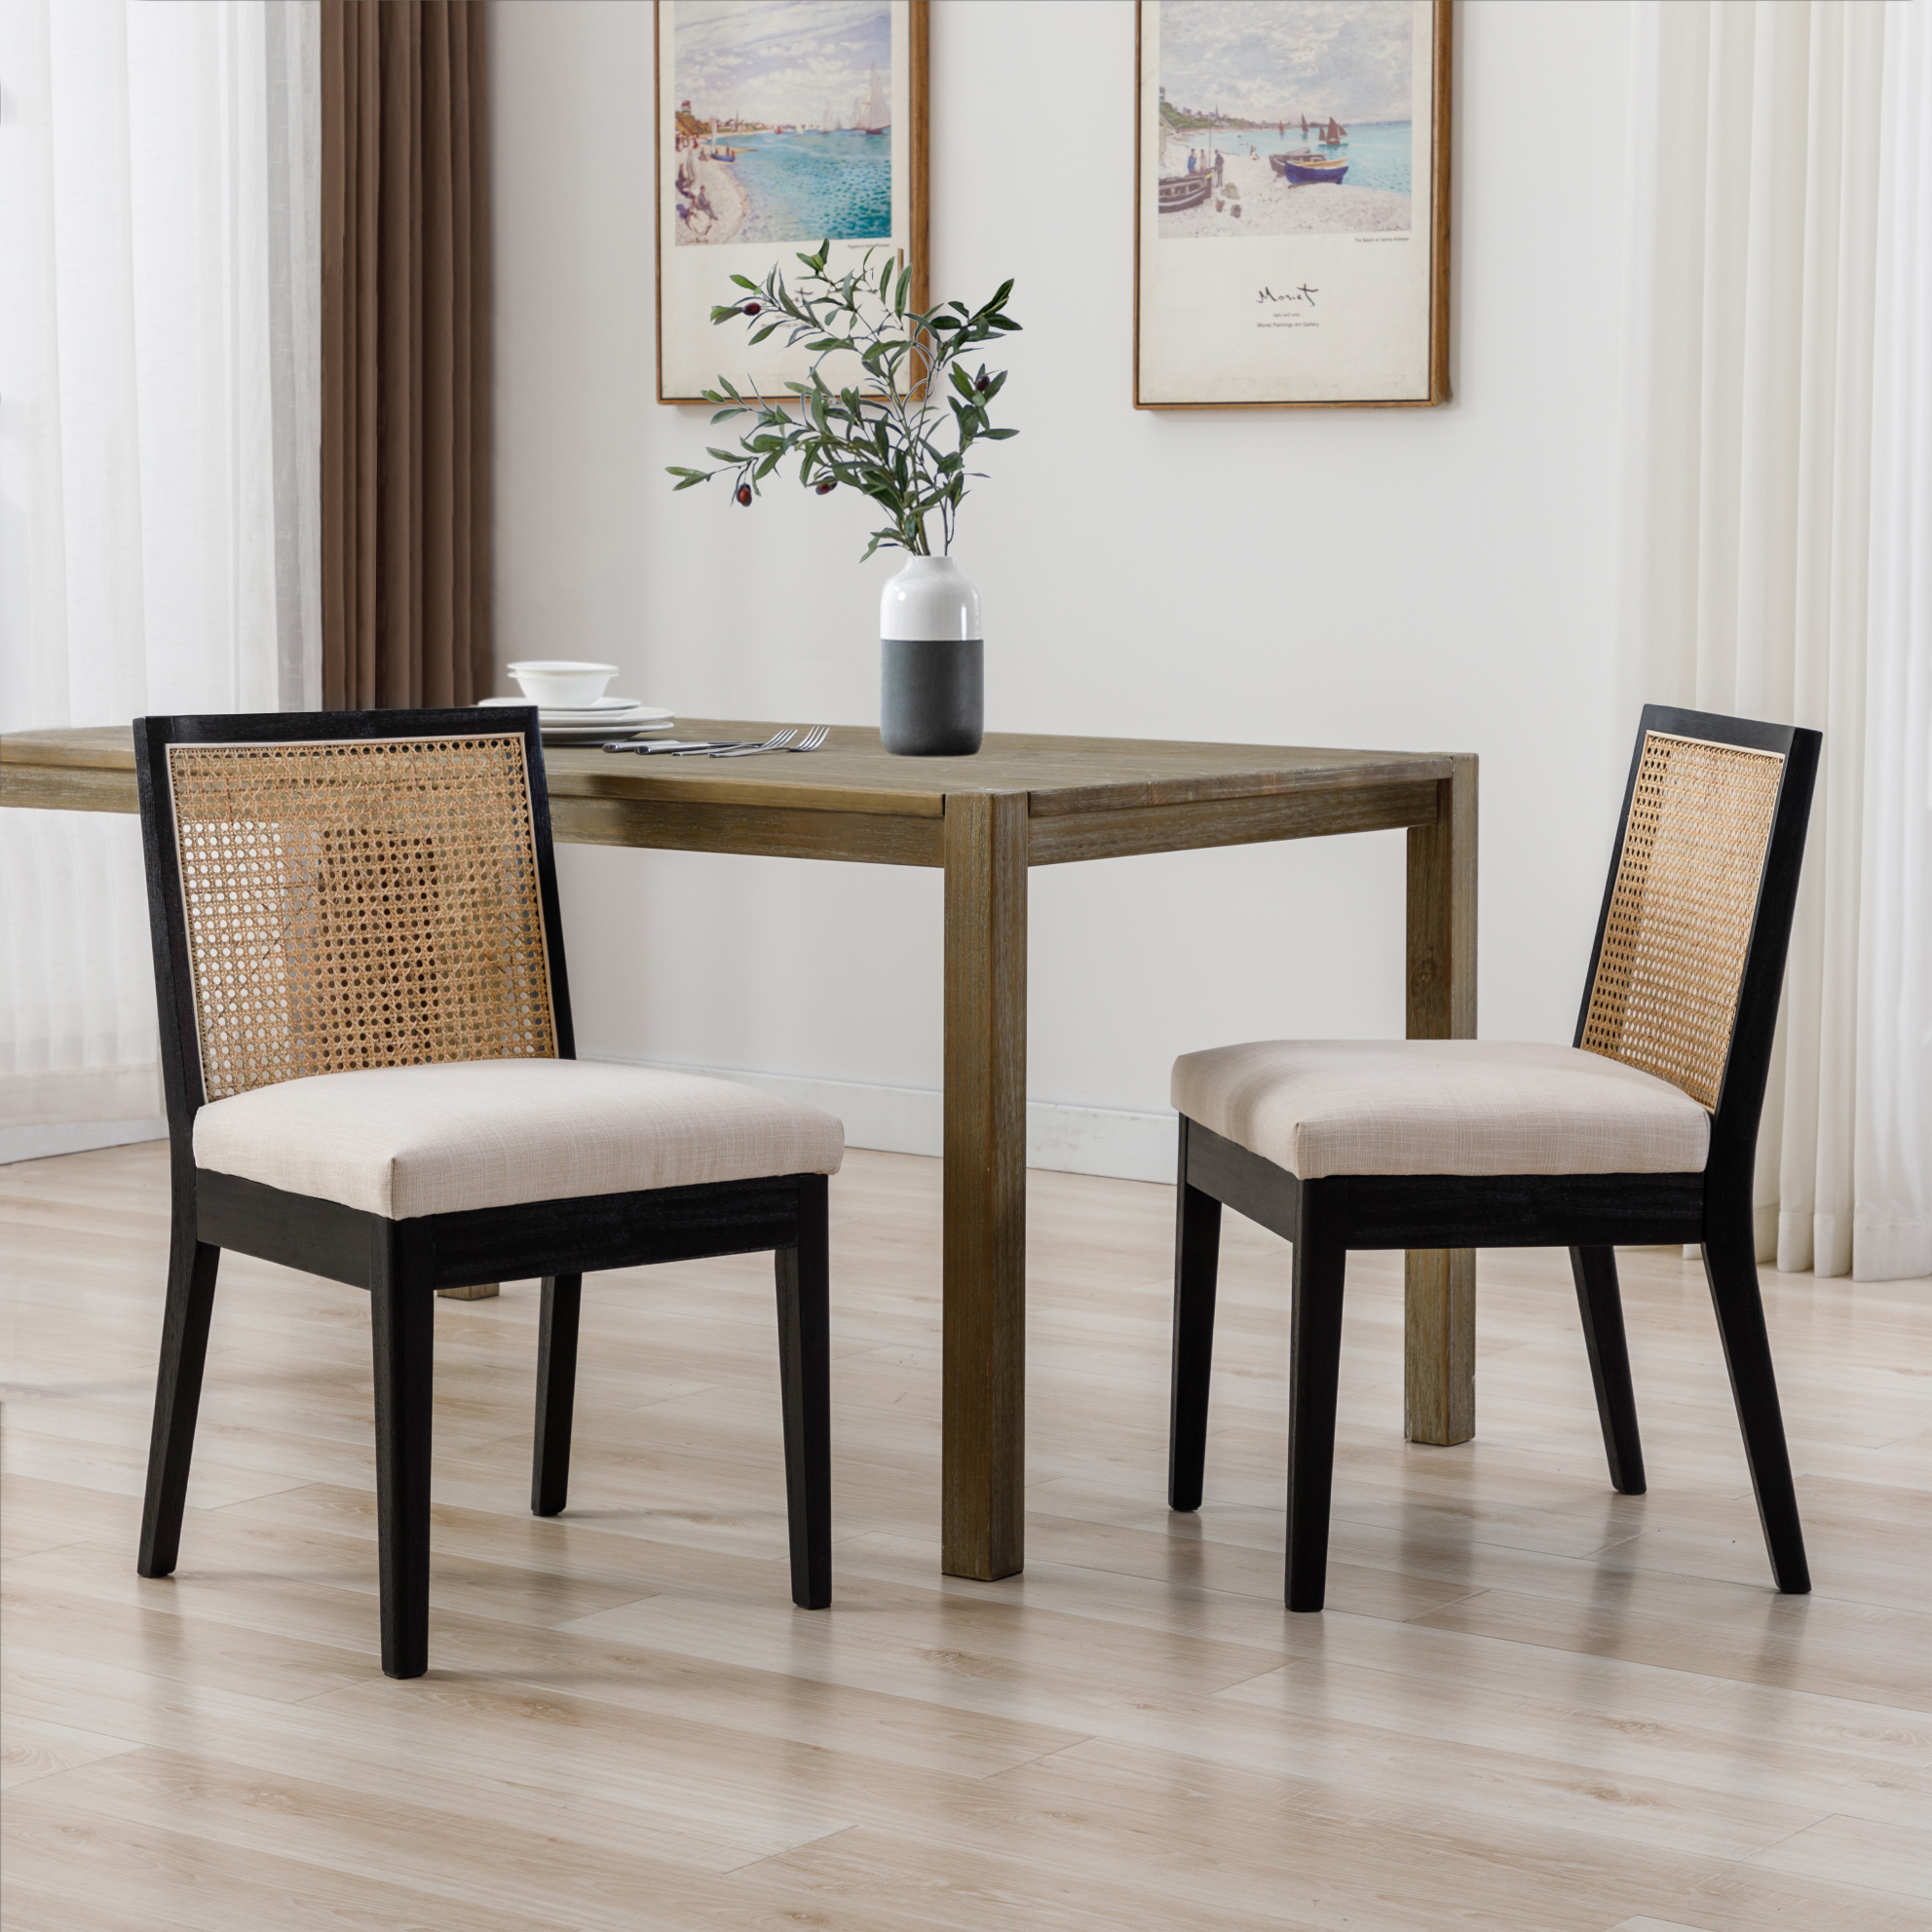 Weston Cane Dining Chairs (Set of 2)